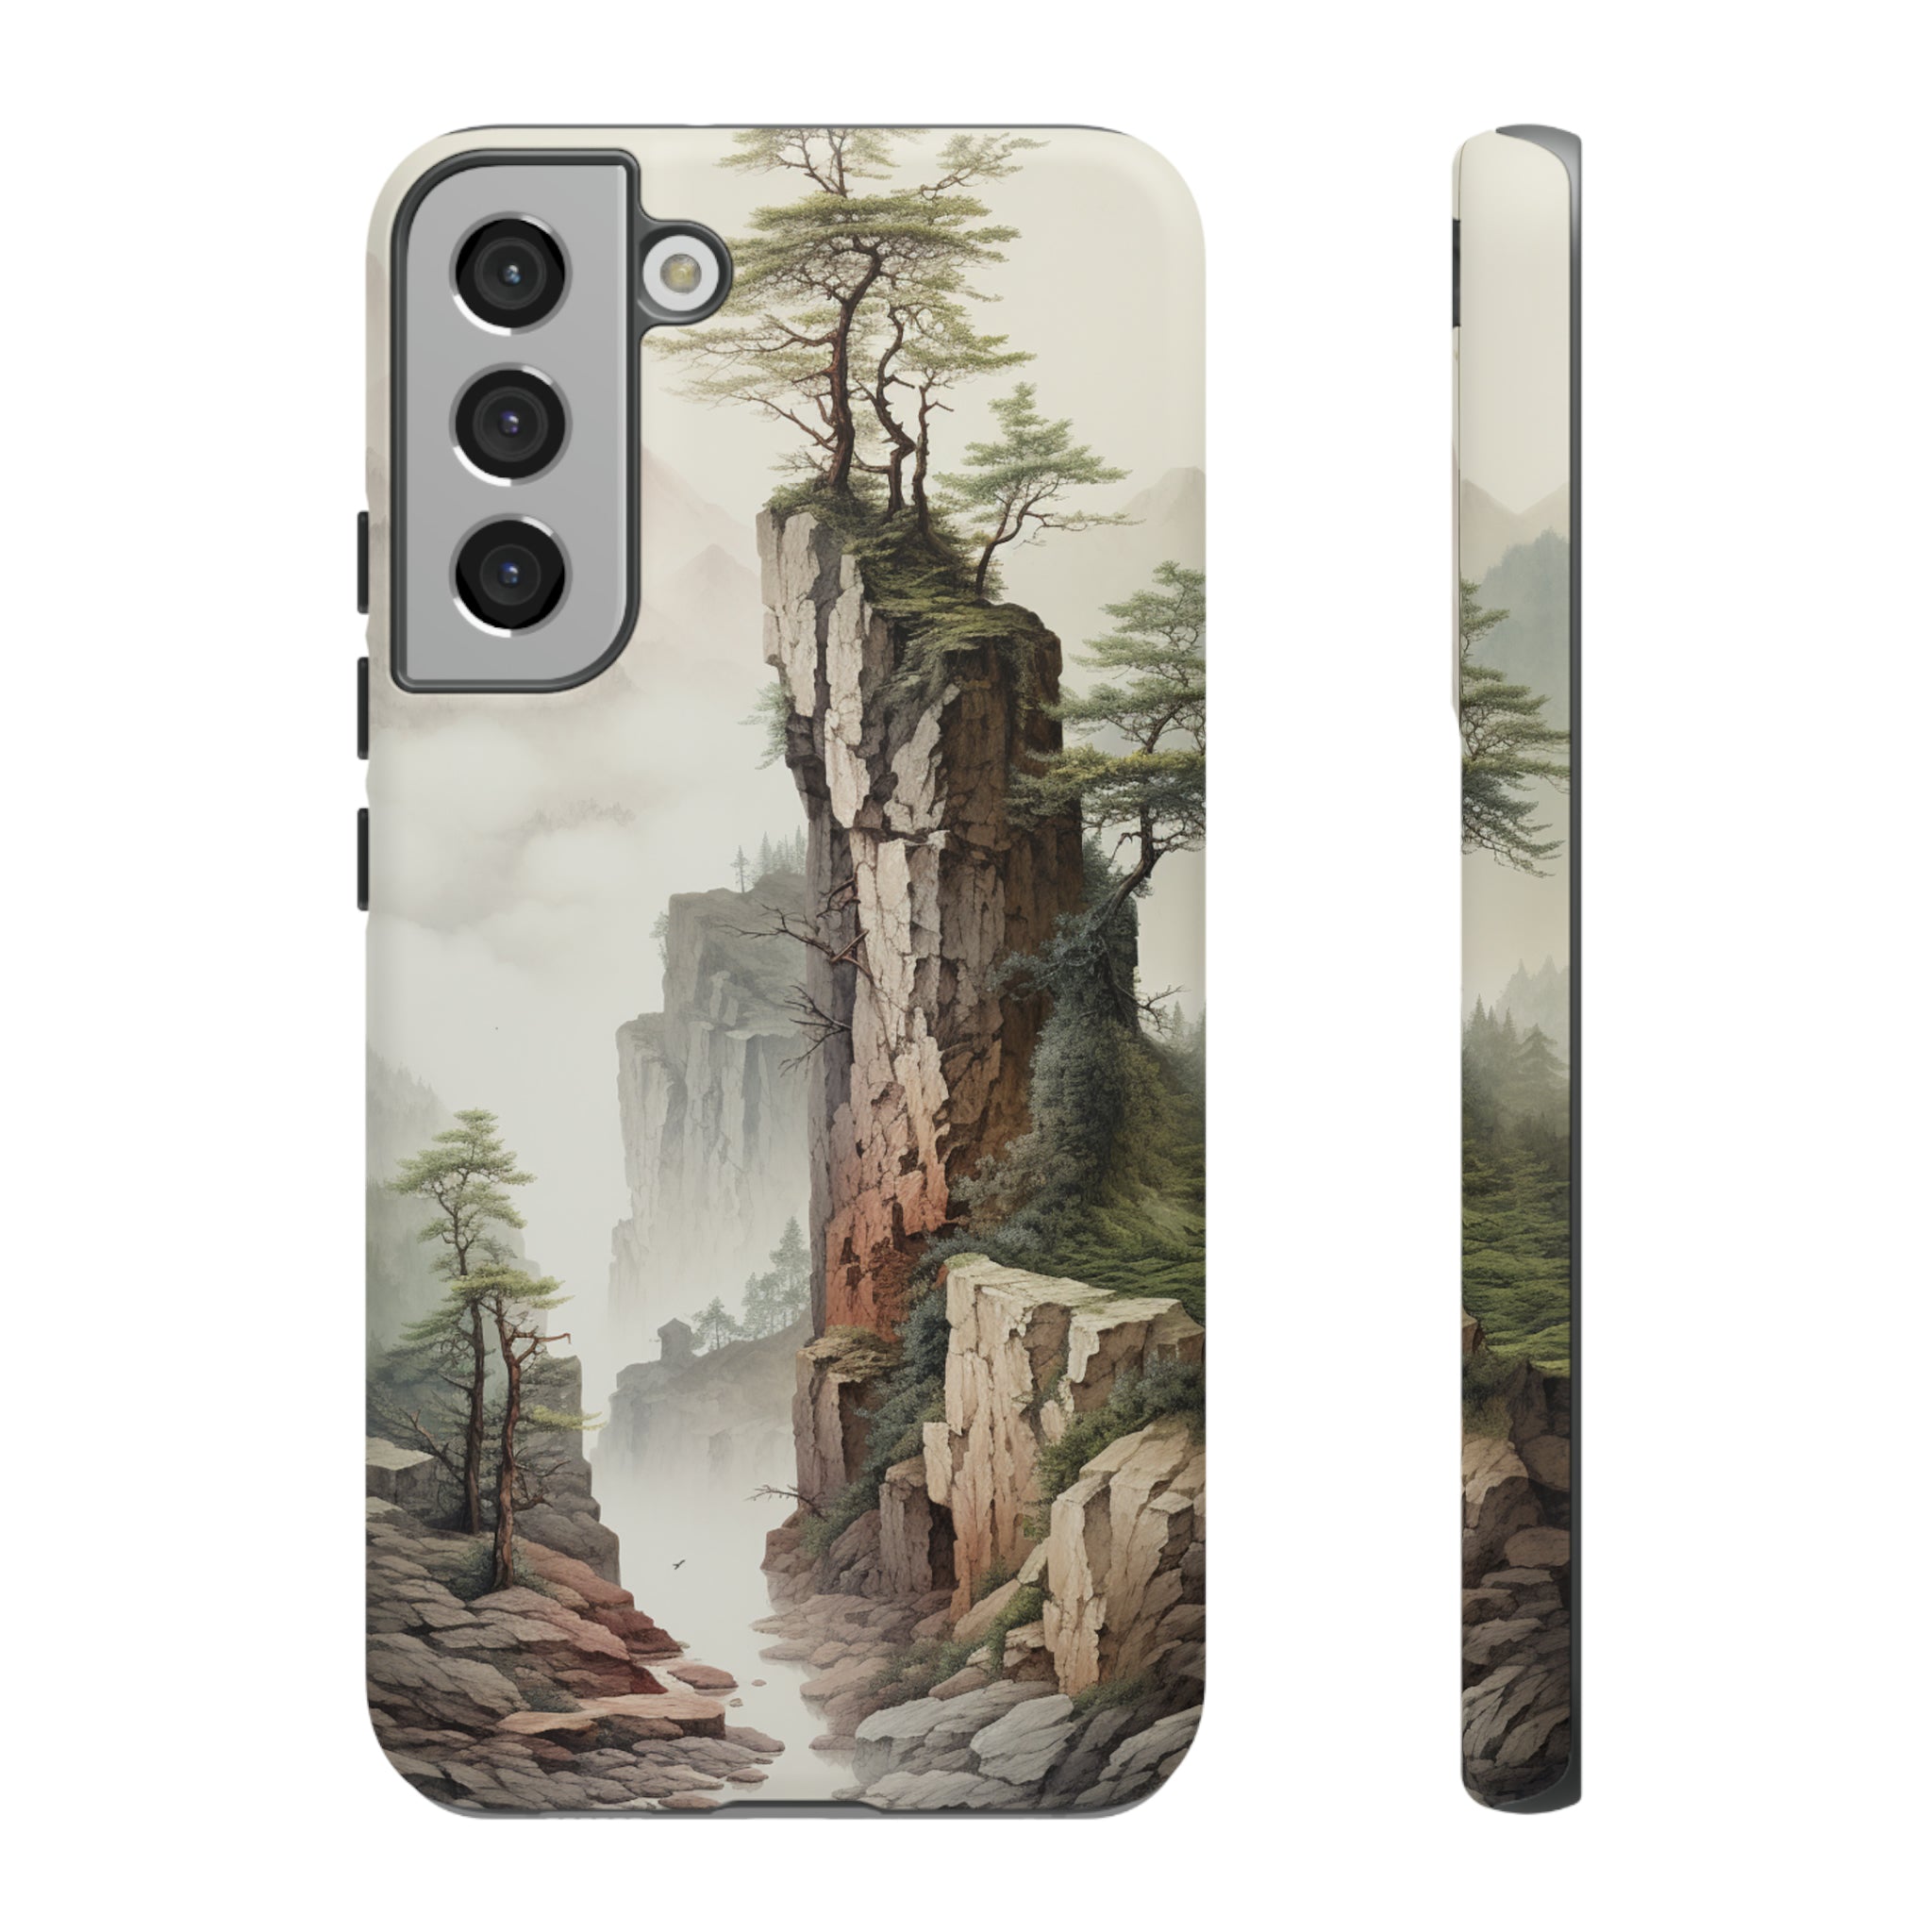 NiceView - Phone Cases